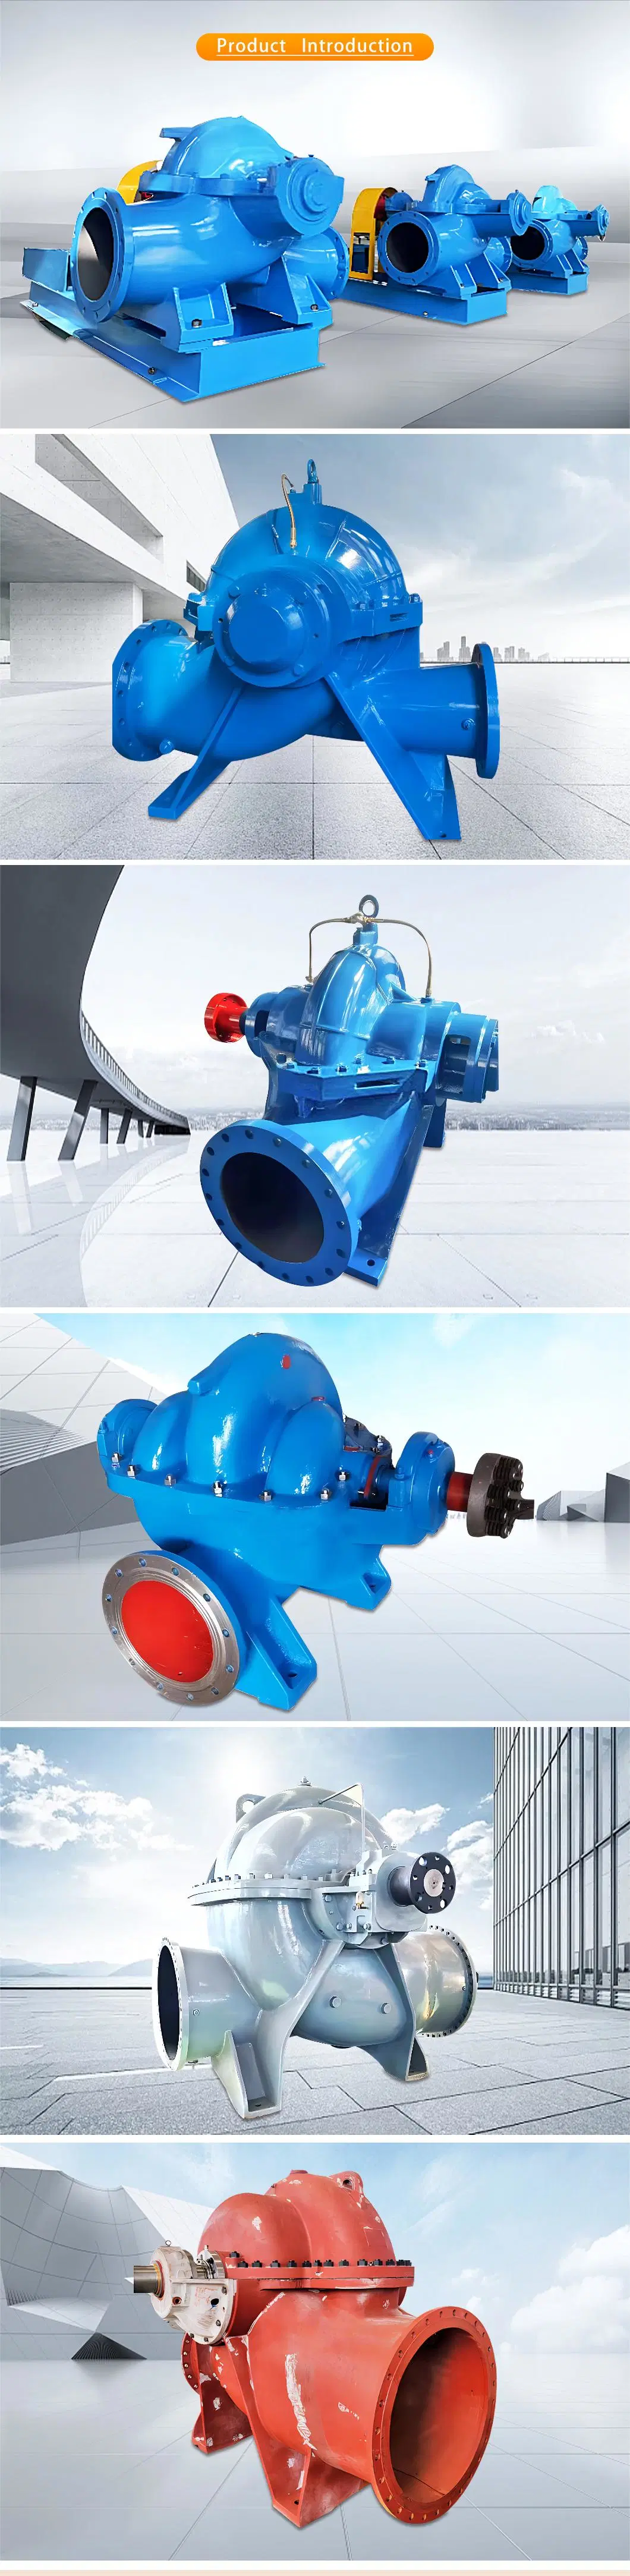 Advanced Double-Suction Water Pump for Municipal Water Supply - Flow Rate: [5700m&sup3; /H], Head: [89.5m], Power: [2670kw]